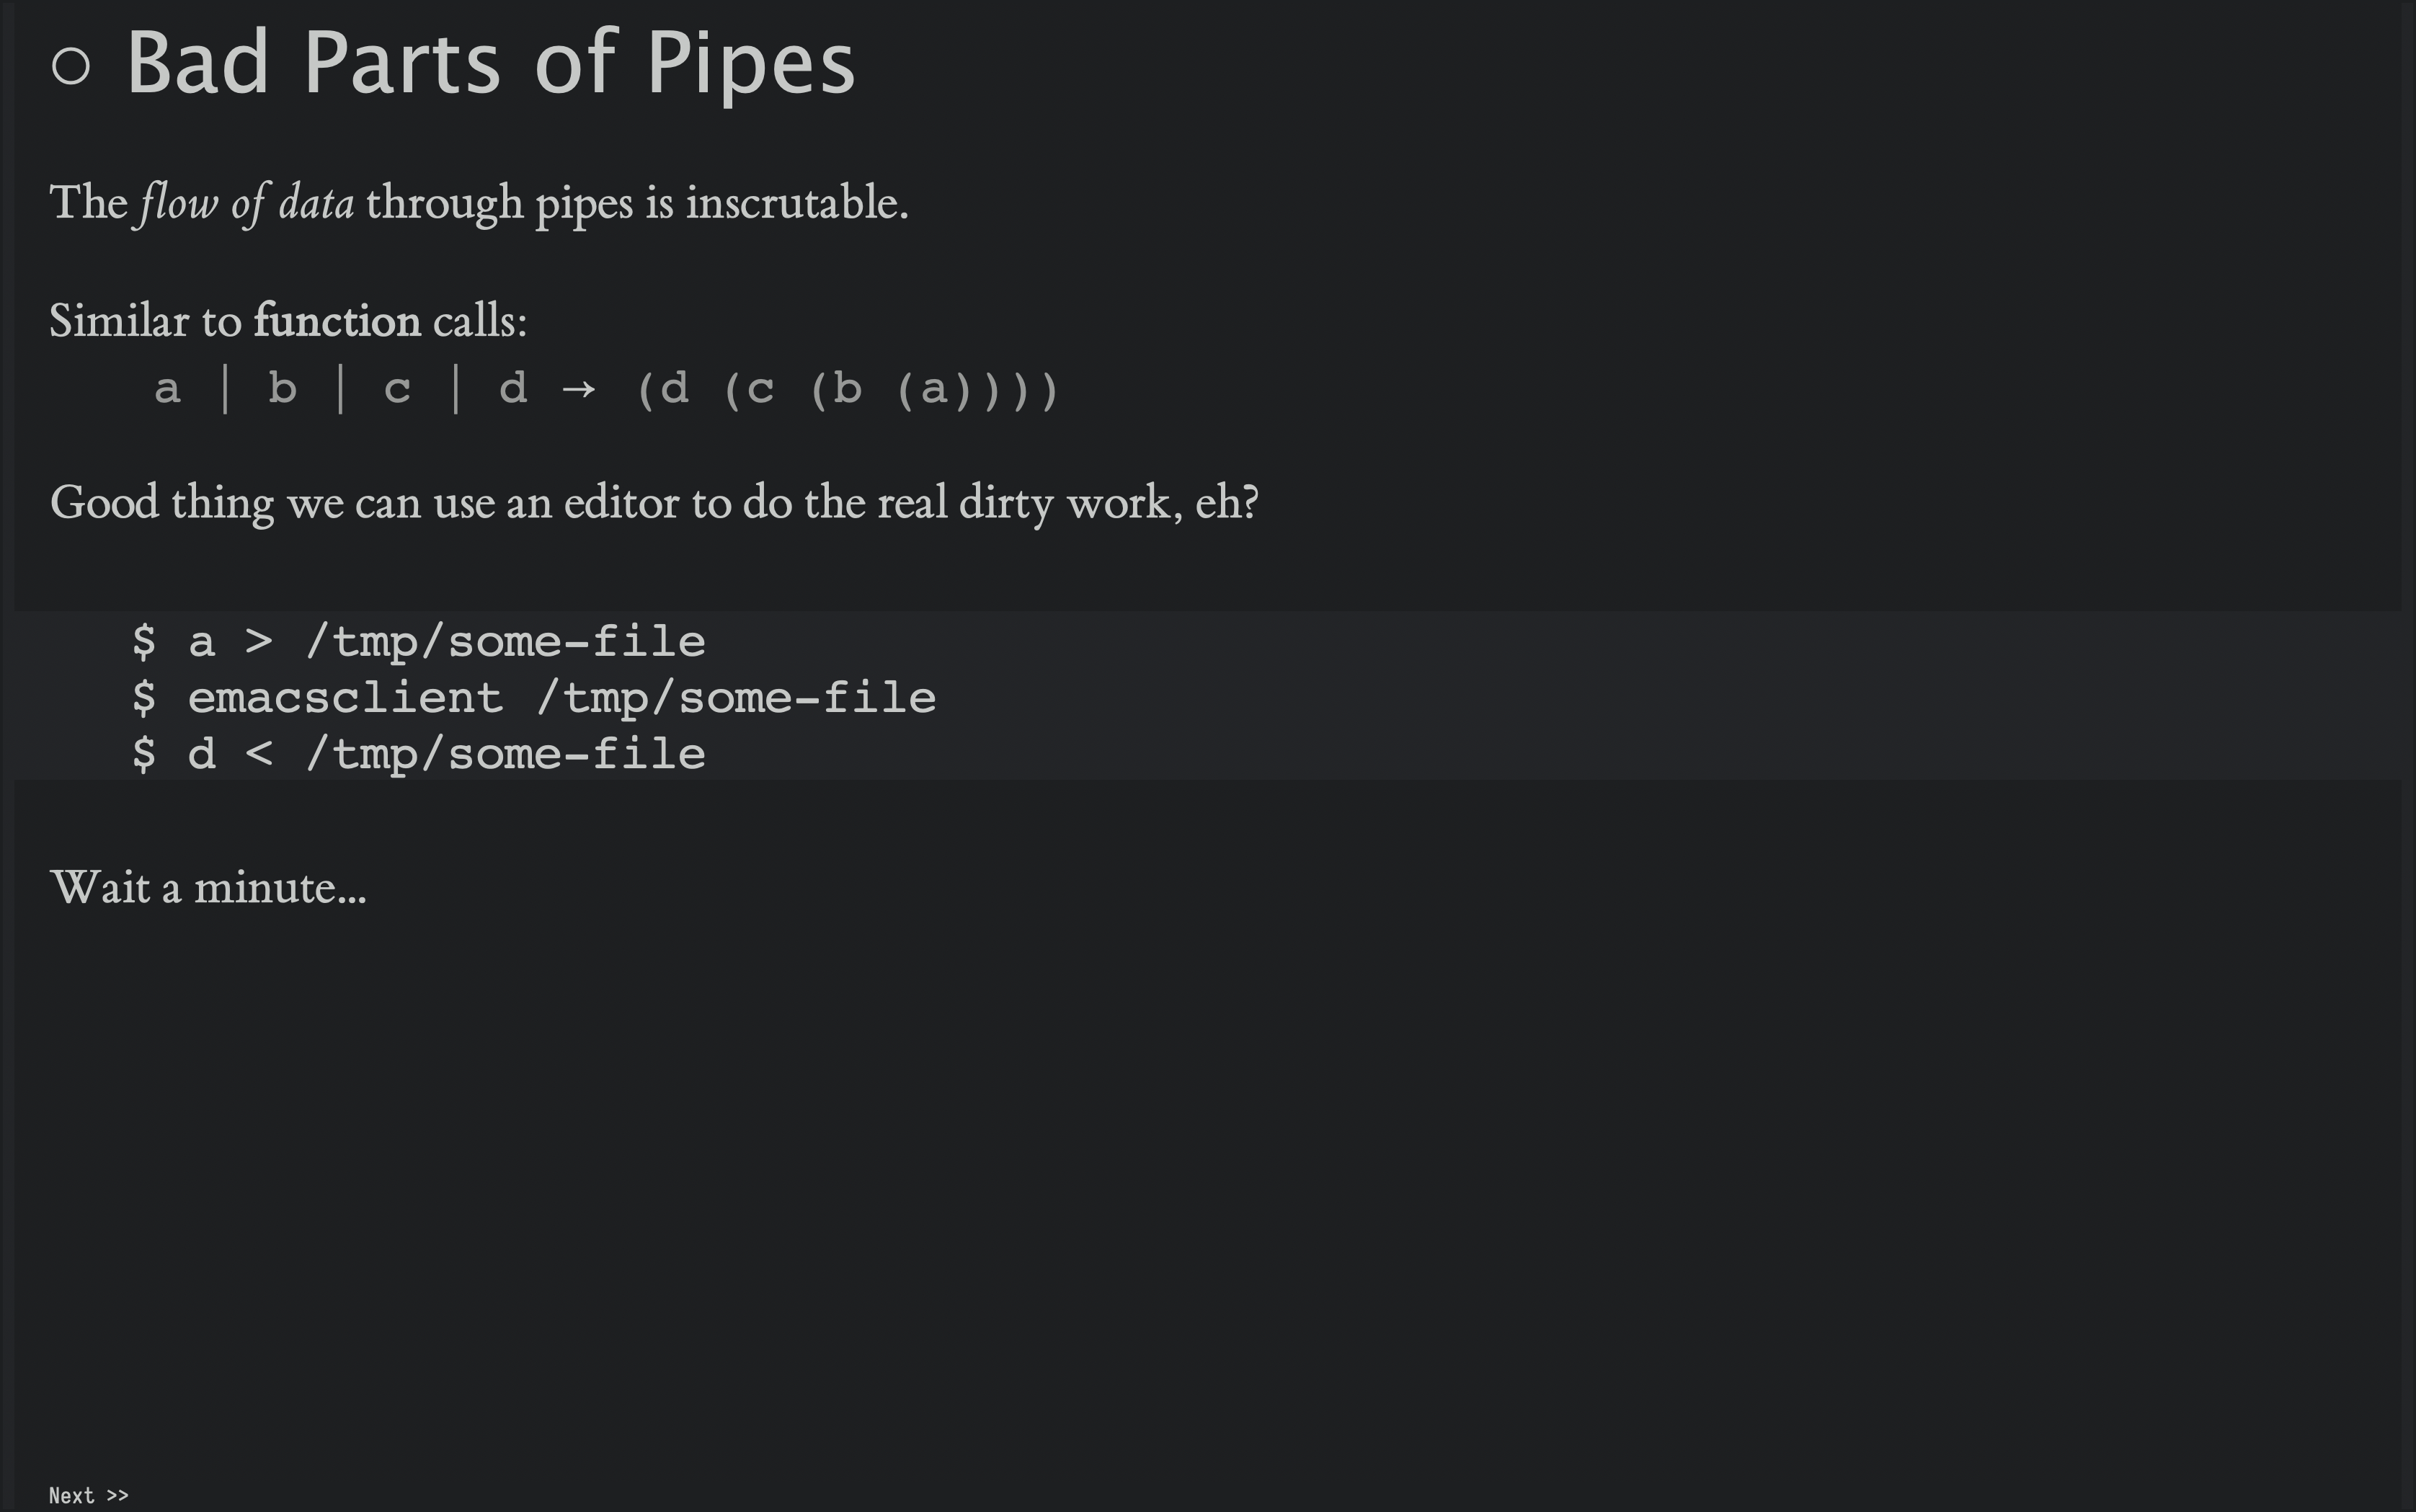 The data through pipes is inscrutable.